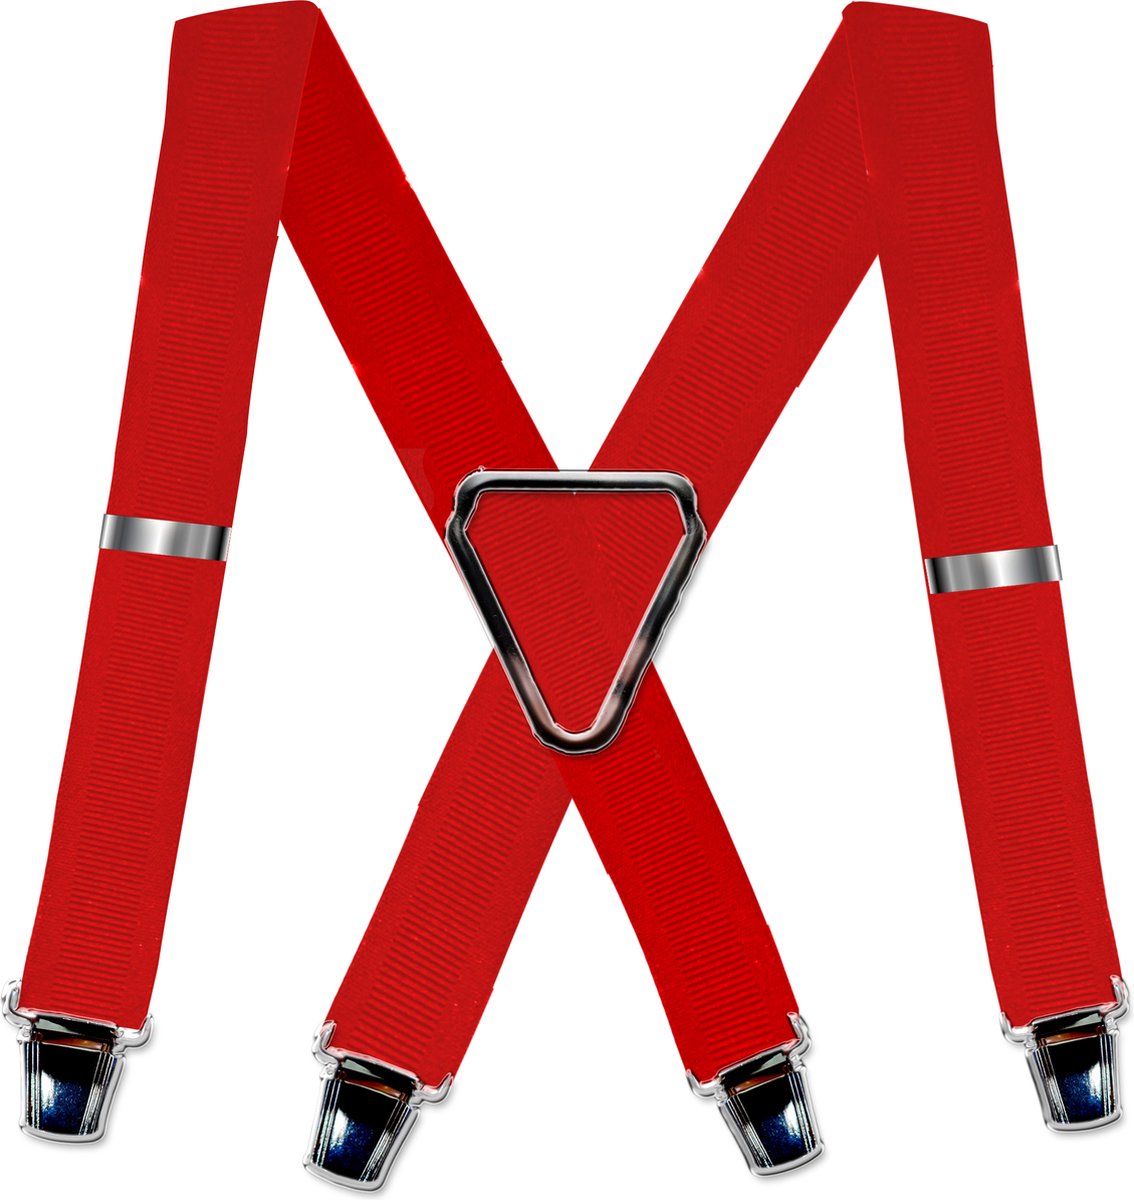 4-point suspenders 'Striped' with wide extra strong sturdy clips Red Color